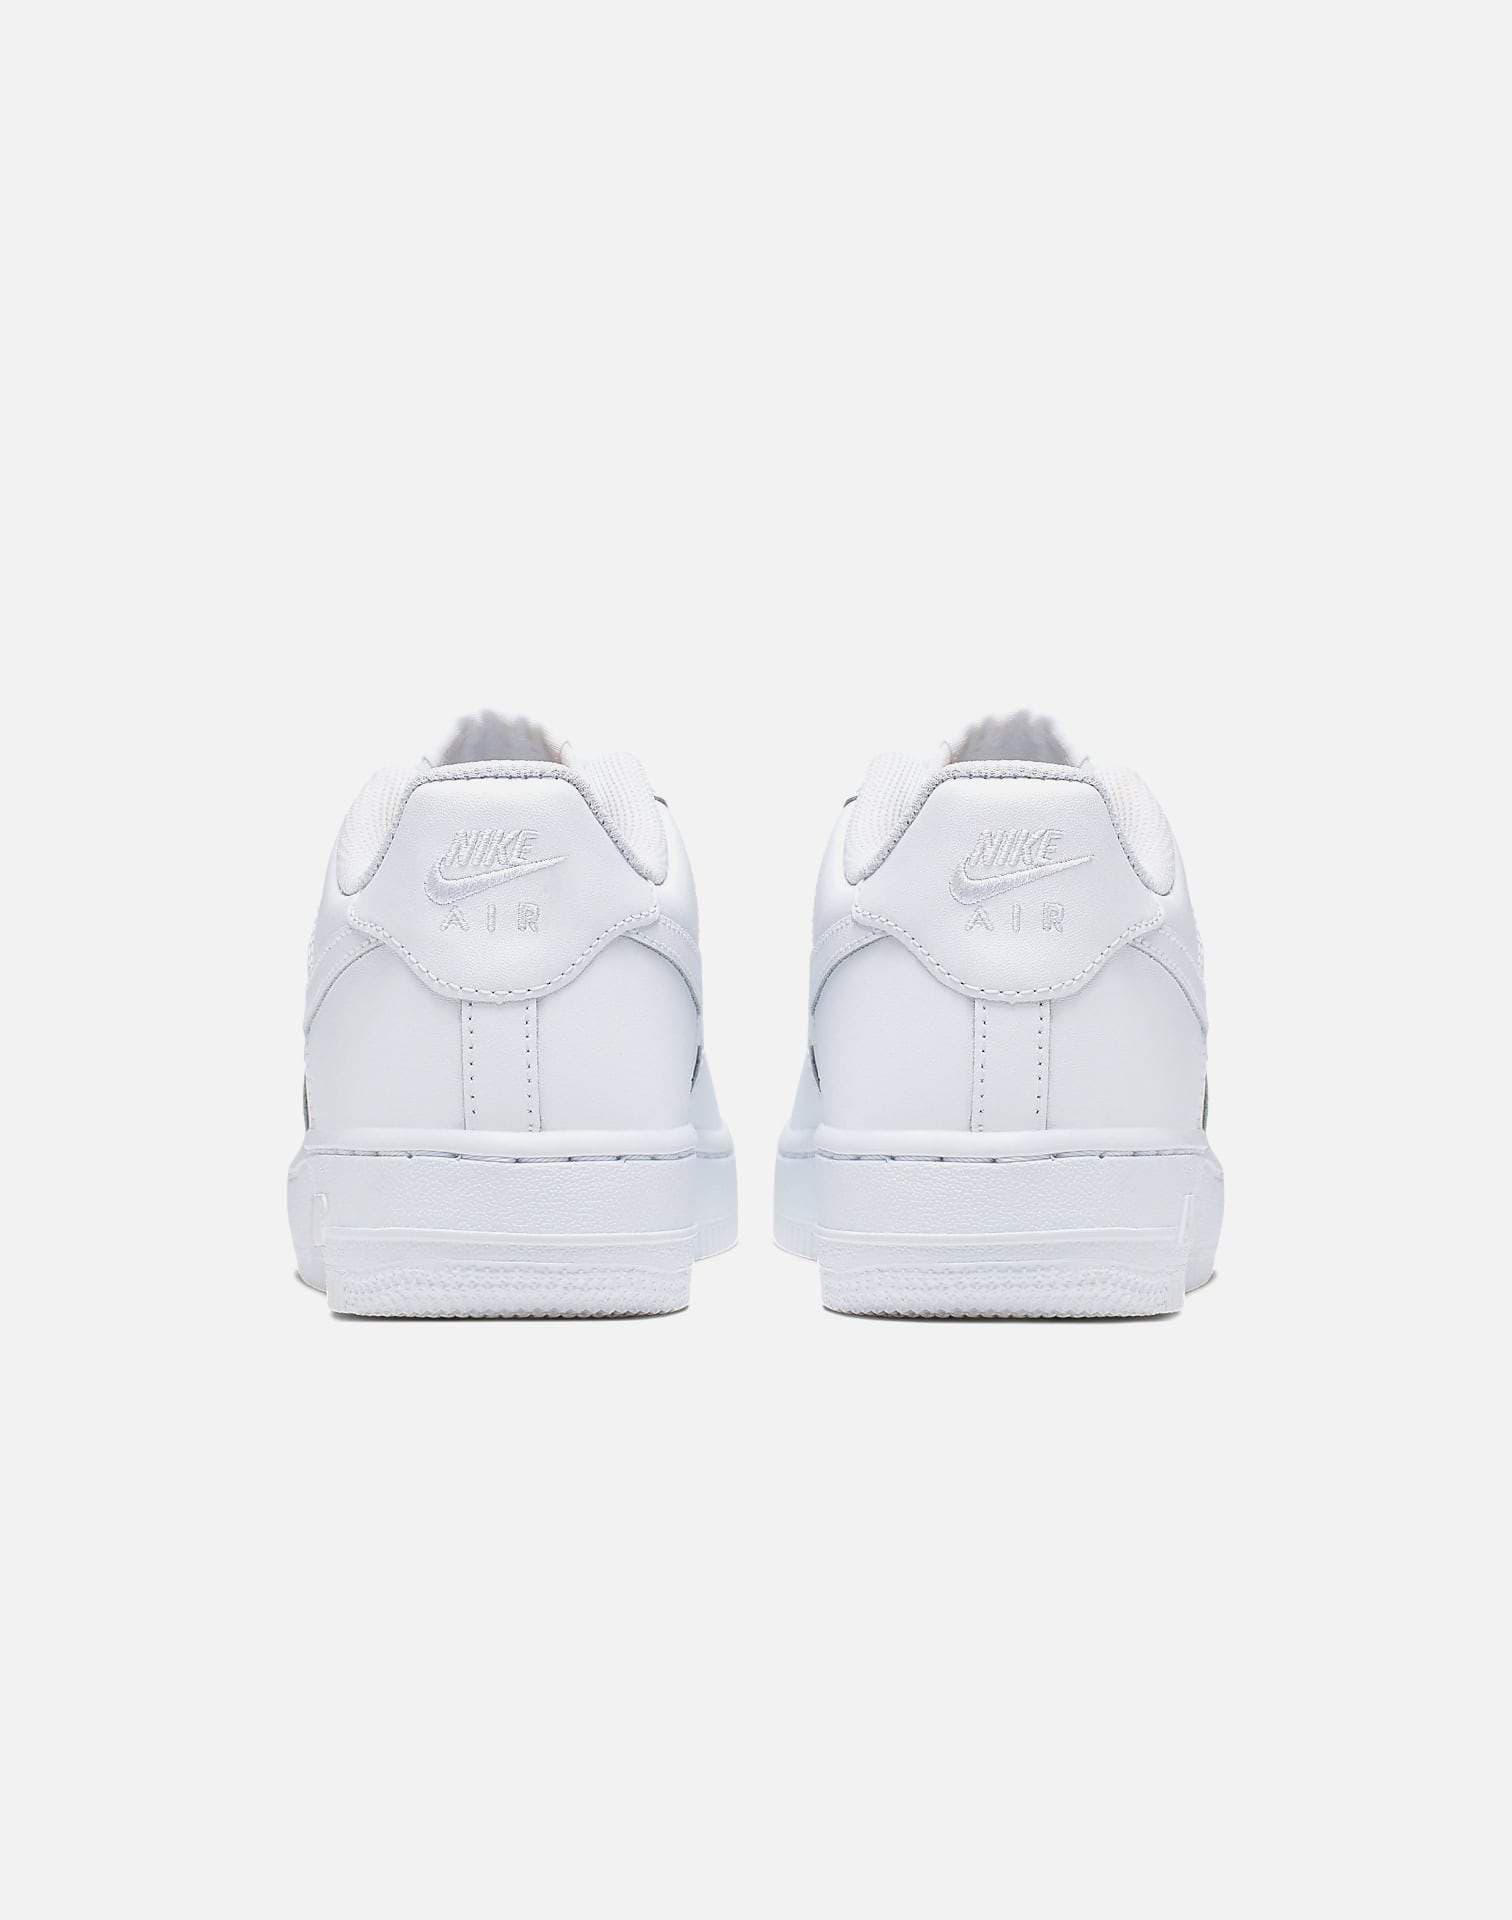 nike air force 1 low grade school white